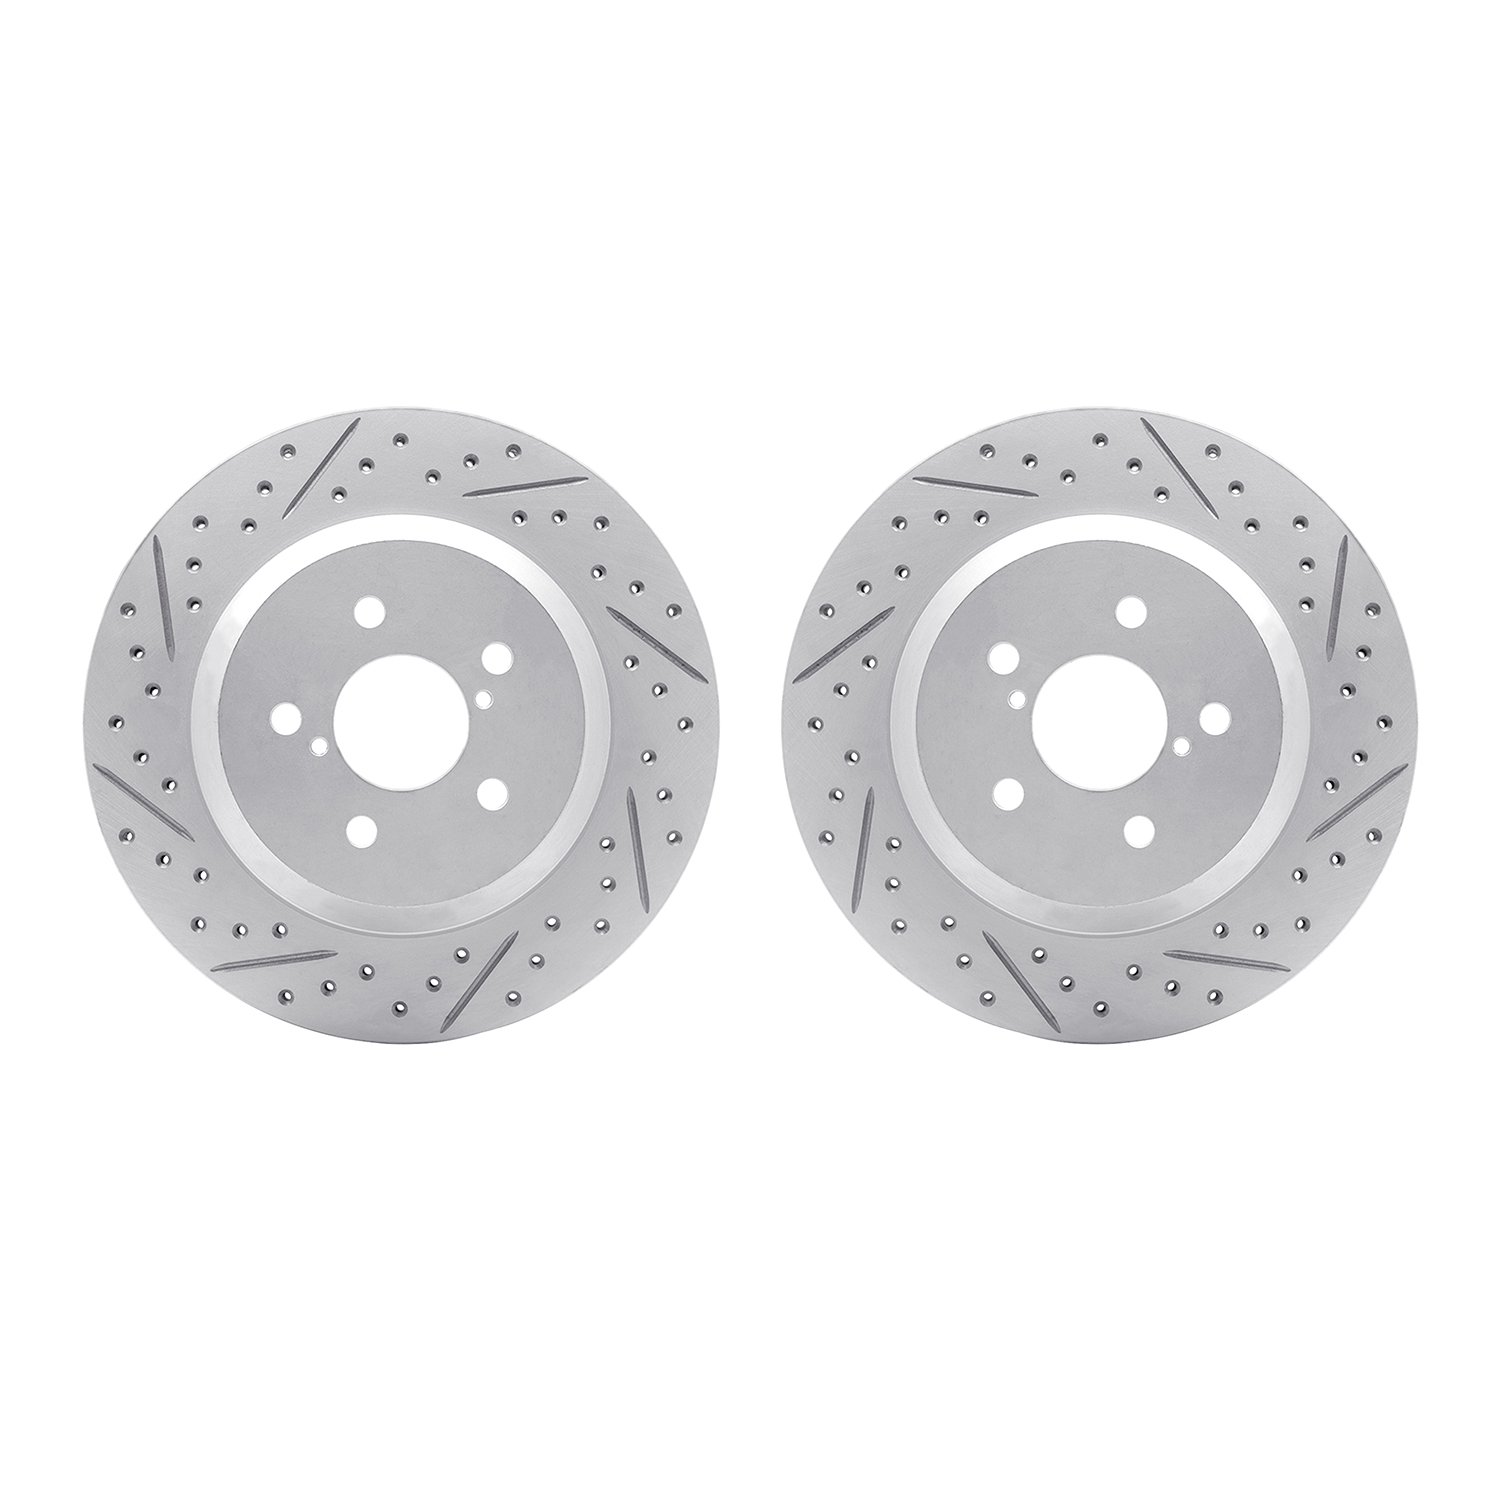 2002-13024 Geoperformance Drilled/Slotted Brake Rotors, Fits Select Subaru, Position: Rear